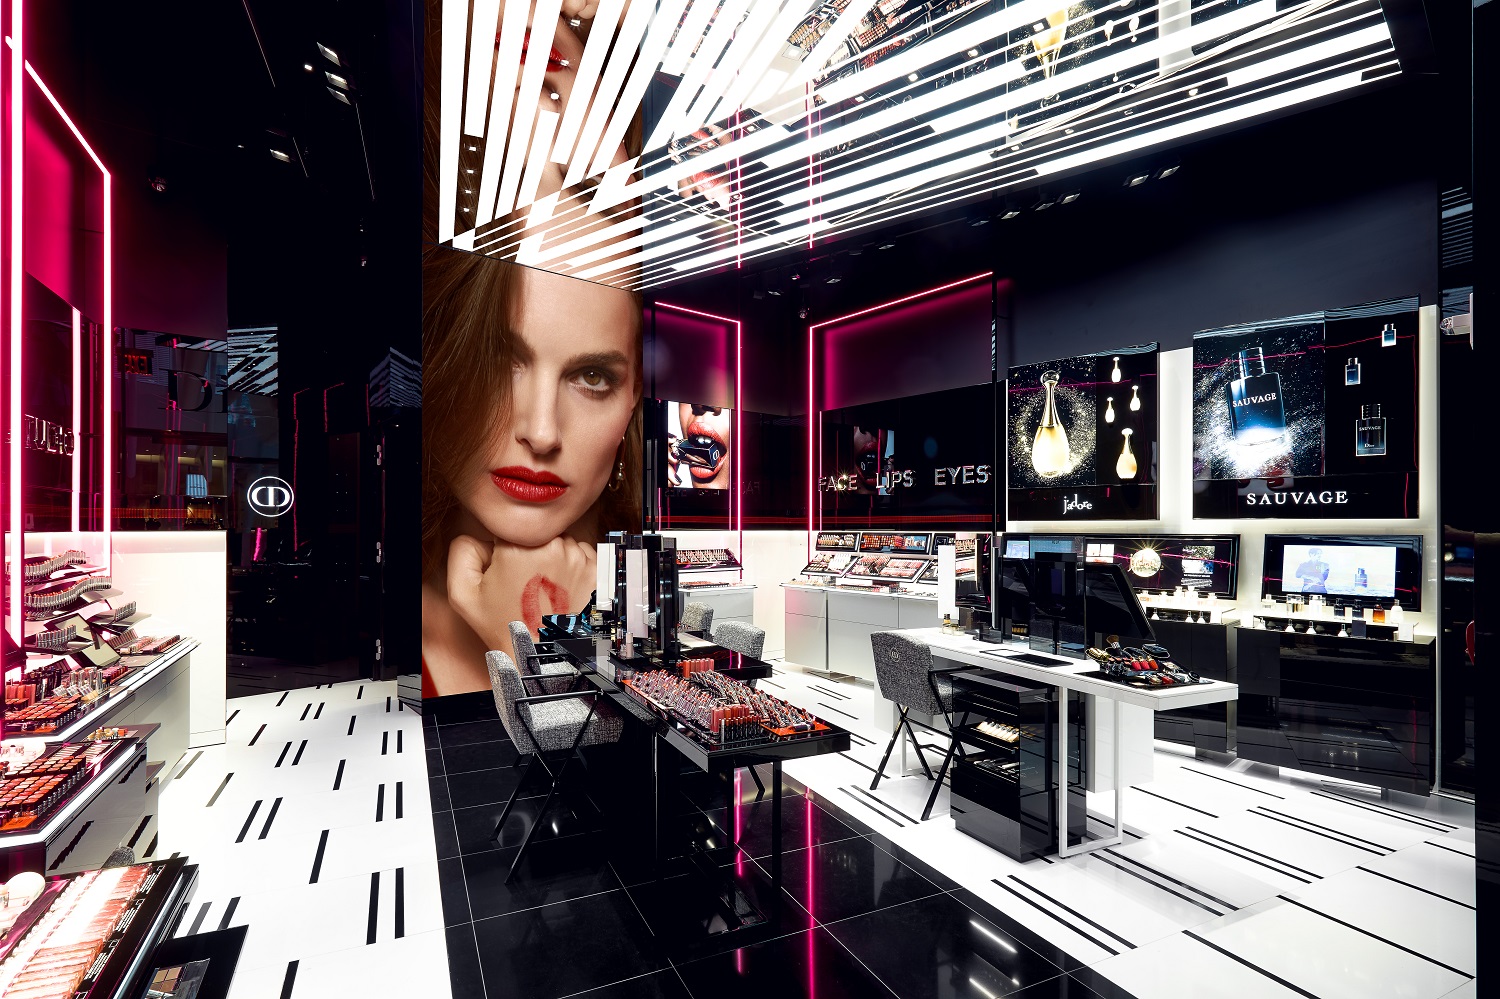 Withered Temerity ris Dior Opens 1st Makeup Concept Beauty Boutique In NYC | LATF USA NEWS